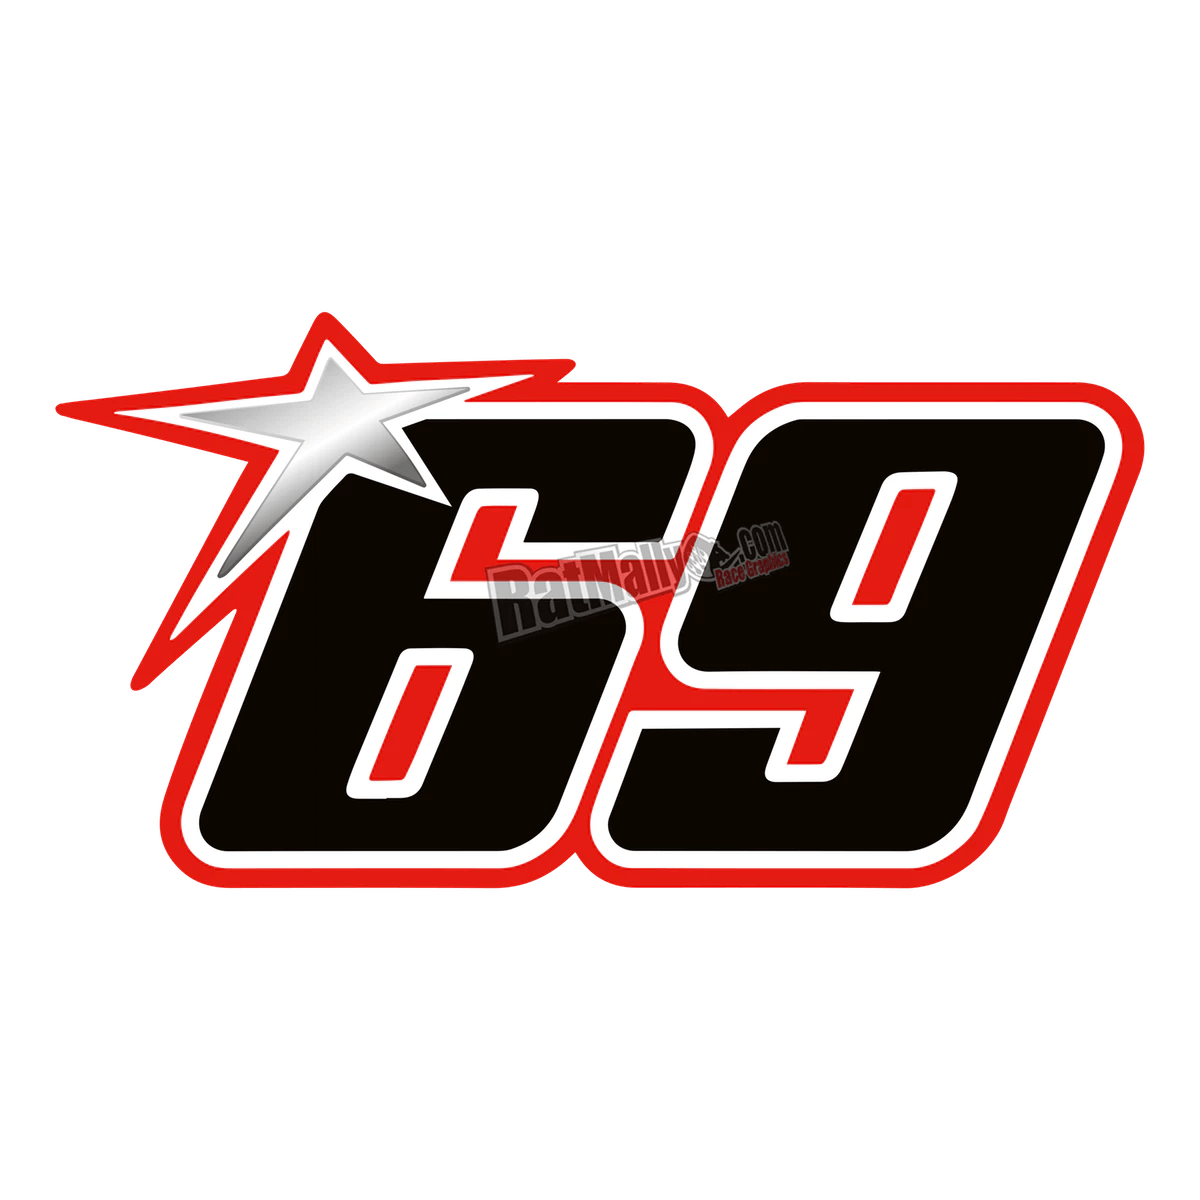 Black White and Red Company Logo - Number. Motocross. Numbers, Racing, Motorcycle companies